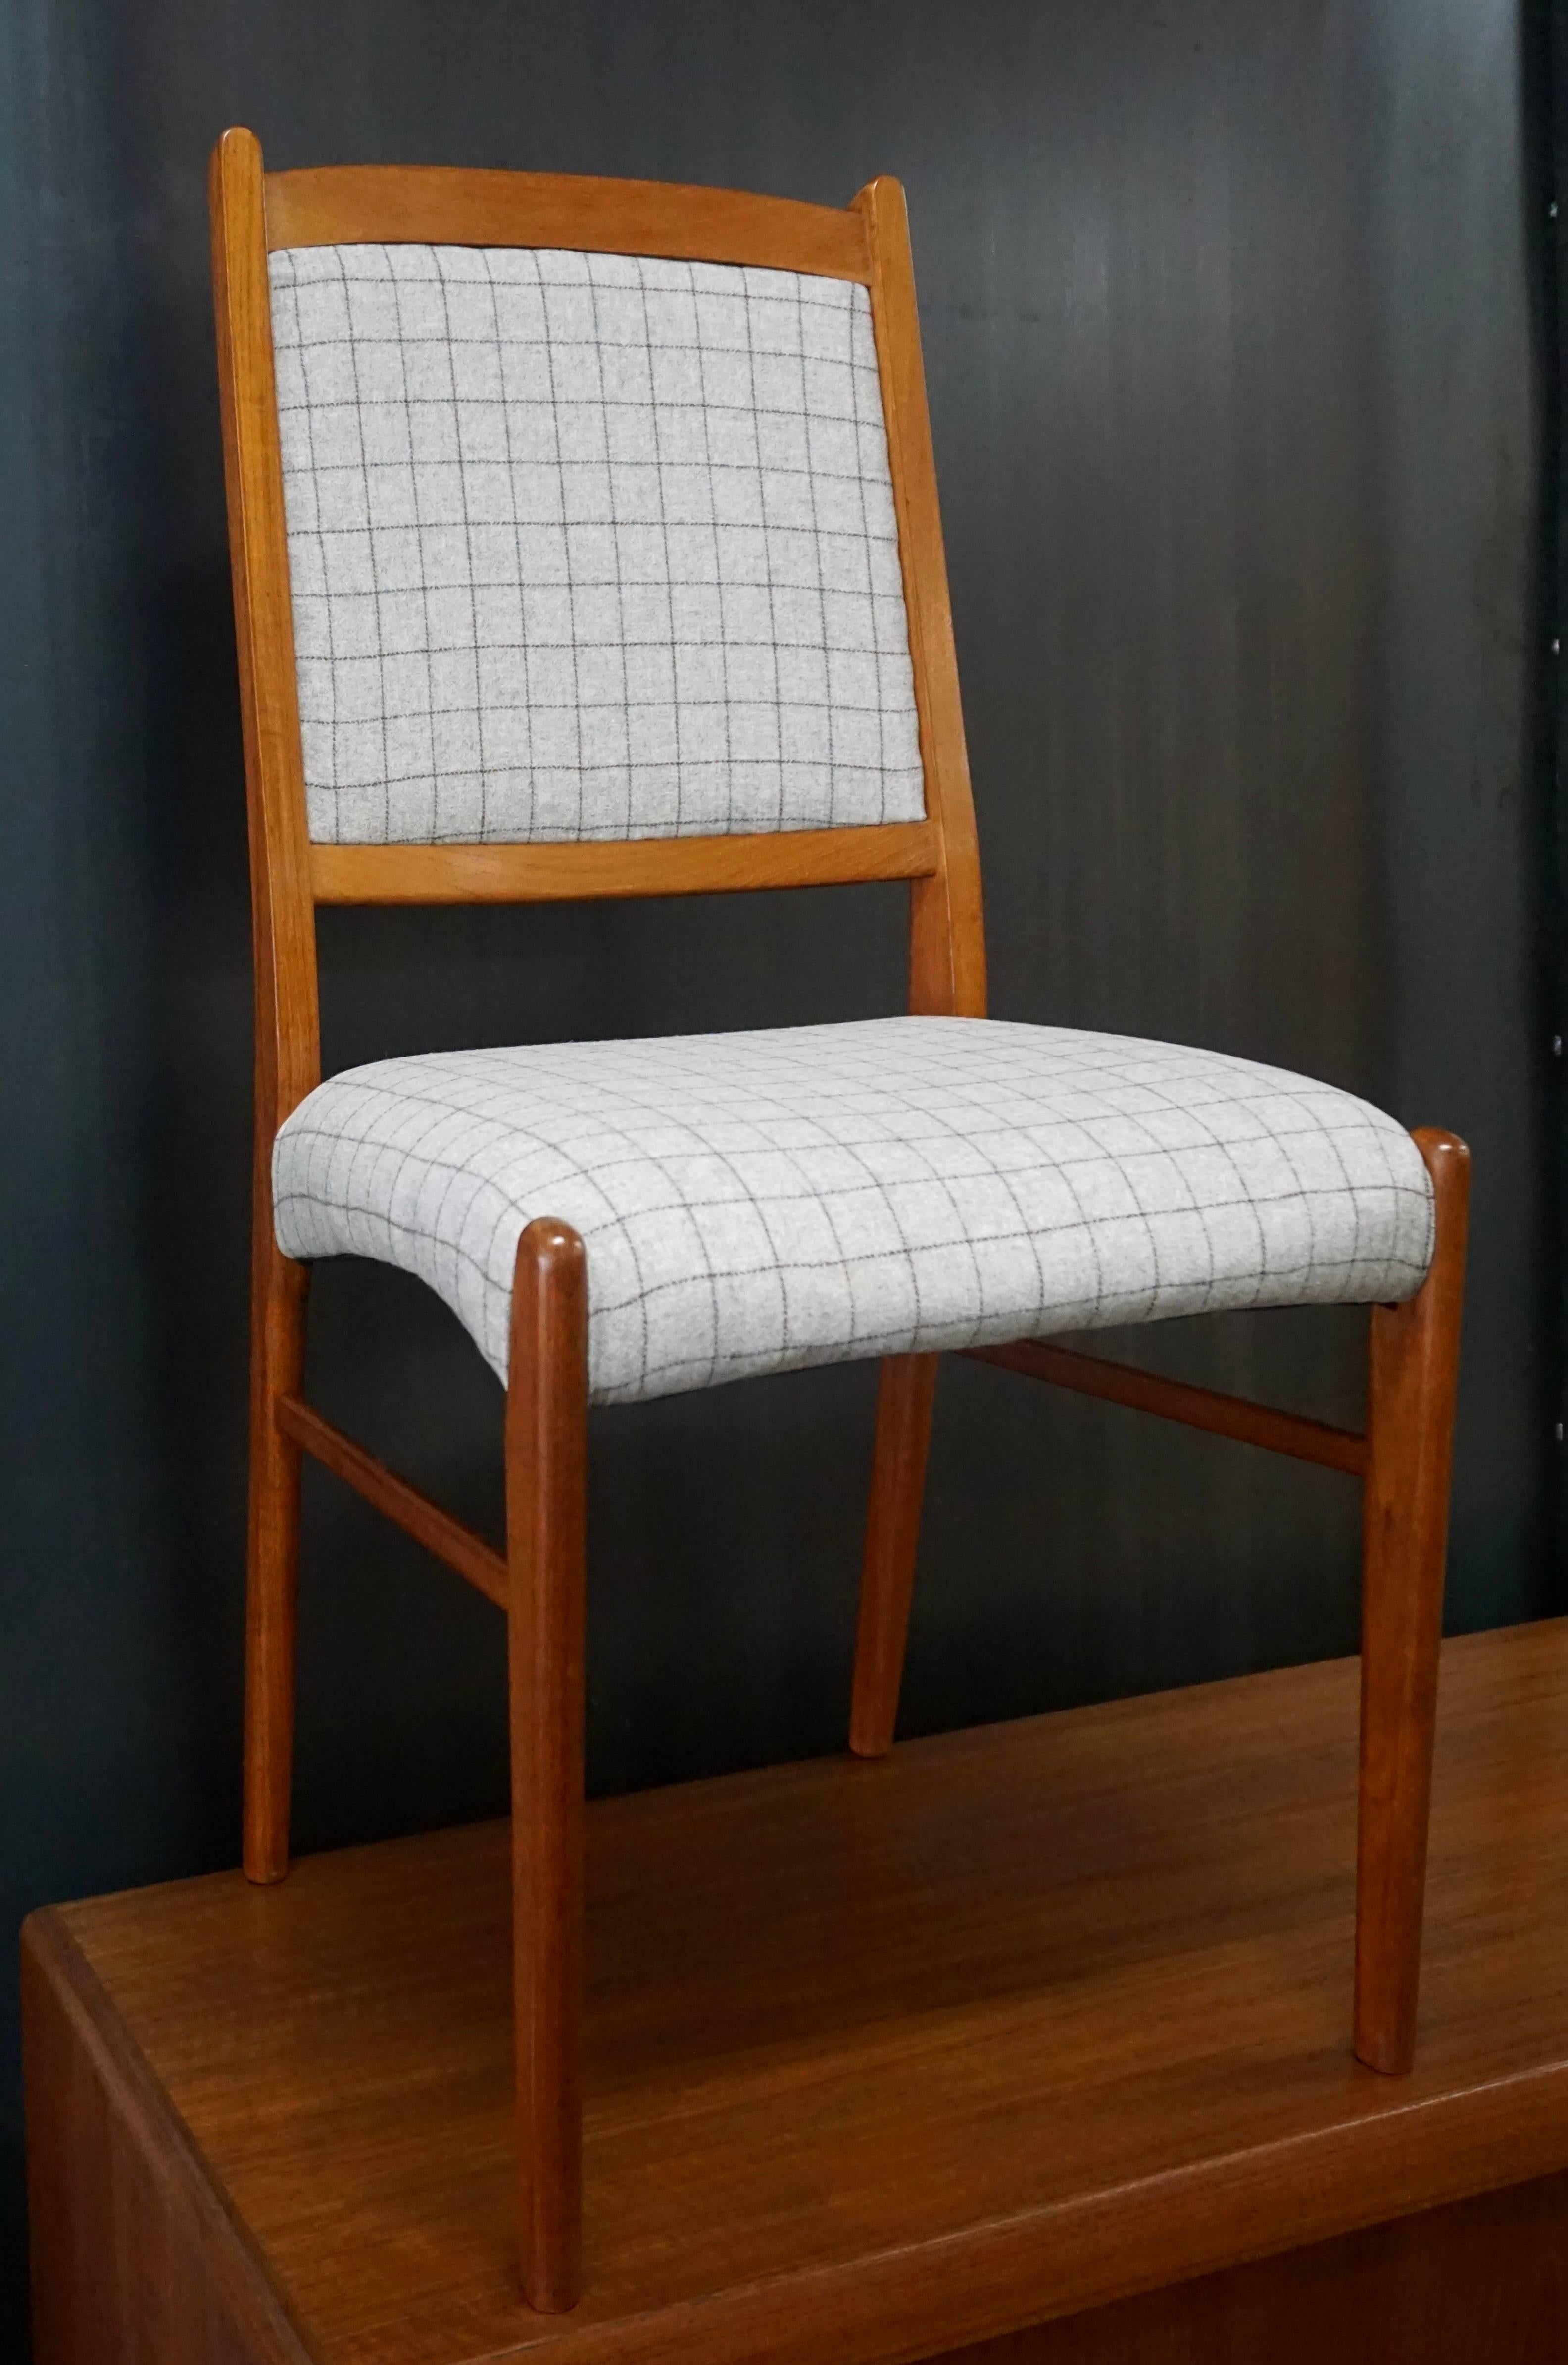 Two armchairs and six side chairs in this set. Made in Denmark. Teak frames, freshly oiled. New wool blend fabric from Greenhouse Fabrics (B6297 Vapor). Very nice, clean set. Armchairs measure: 22.5 in. W x 18.5 in. D x 36.5 in. H.